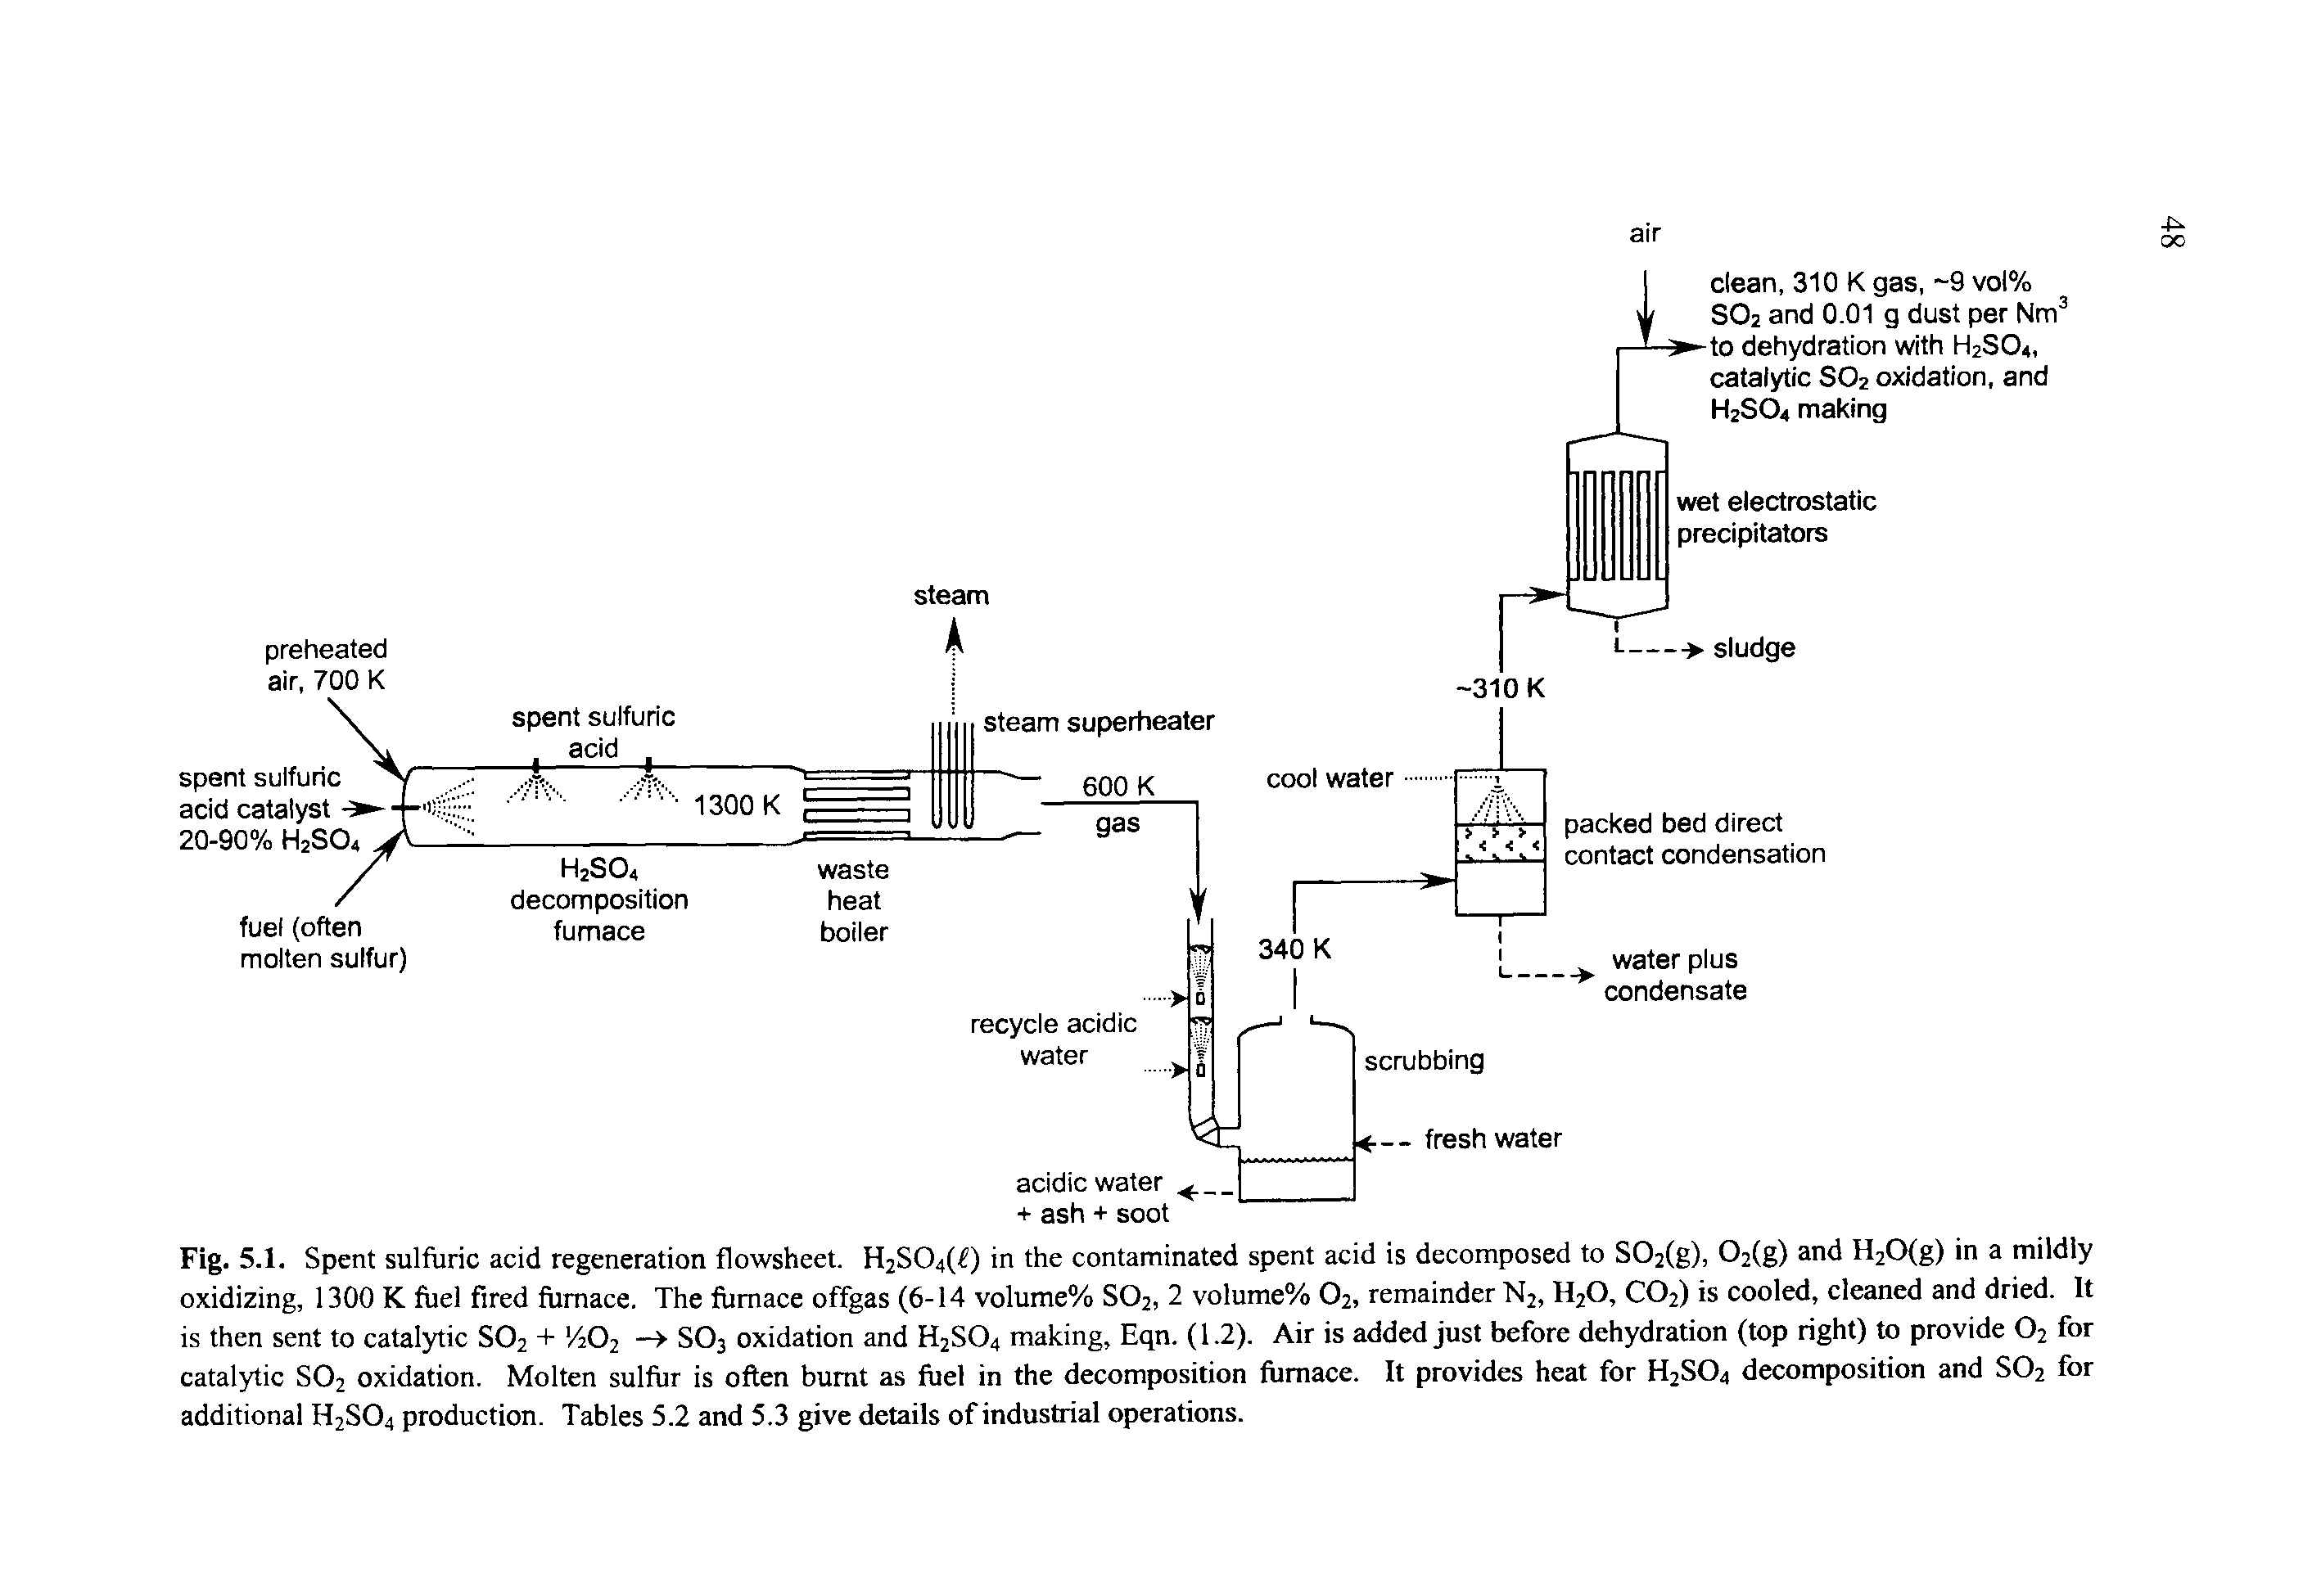 Fig. 5.1. Spent sulfuric acid regeneration flowsheet. H2S04(f) in the contaminated spent acid is decomposed to S02(g), 02(g) and H20(g) in a mildly oxidizing, 1300 K fuel fired furnace. The furnace offgas (6-14 volume% S02, 2 volume% 02, remainder N2, H20, C02) is cooled, cleaned and dried. It is then sent to catalytic S02 + Vi02 —> S03 oxidation and H2S04 making, Eqn. (1.2). Air is added just before dehydration (top right) to provide 02 for catalytic S02 oxidation. Molten sulfur is often burnt as fuel in the decomposition furnace. It provides heat for H2S04 decomposition and S02 for additional H2S04 production. Tables 5.2 and 5.3 give details of industrial operations.